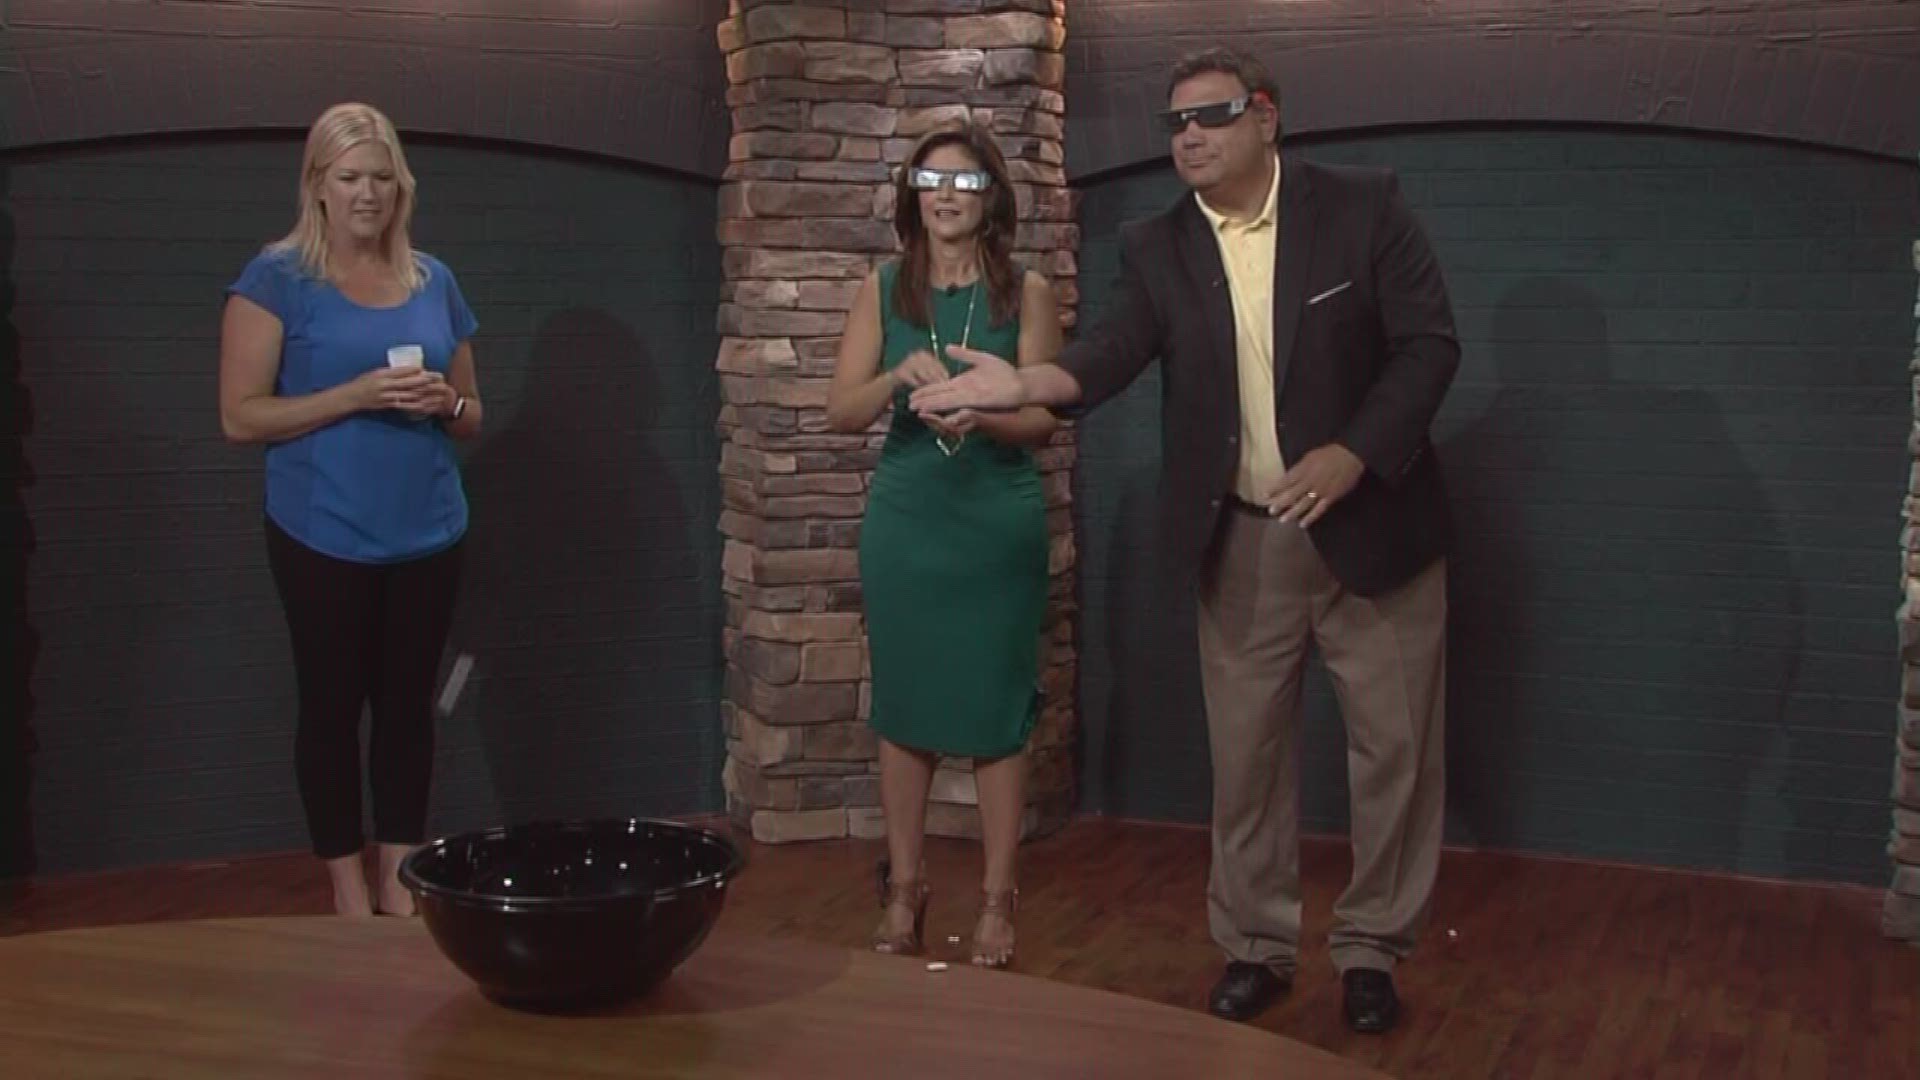 Beth and Russell try to shoot eclipse gum into a bowl while wearing eclipse glasses.